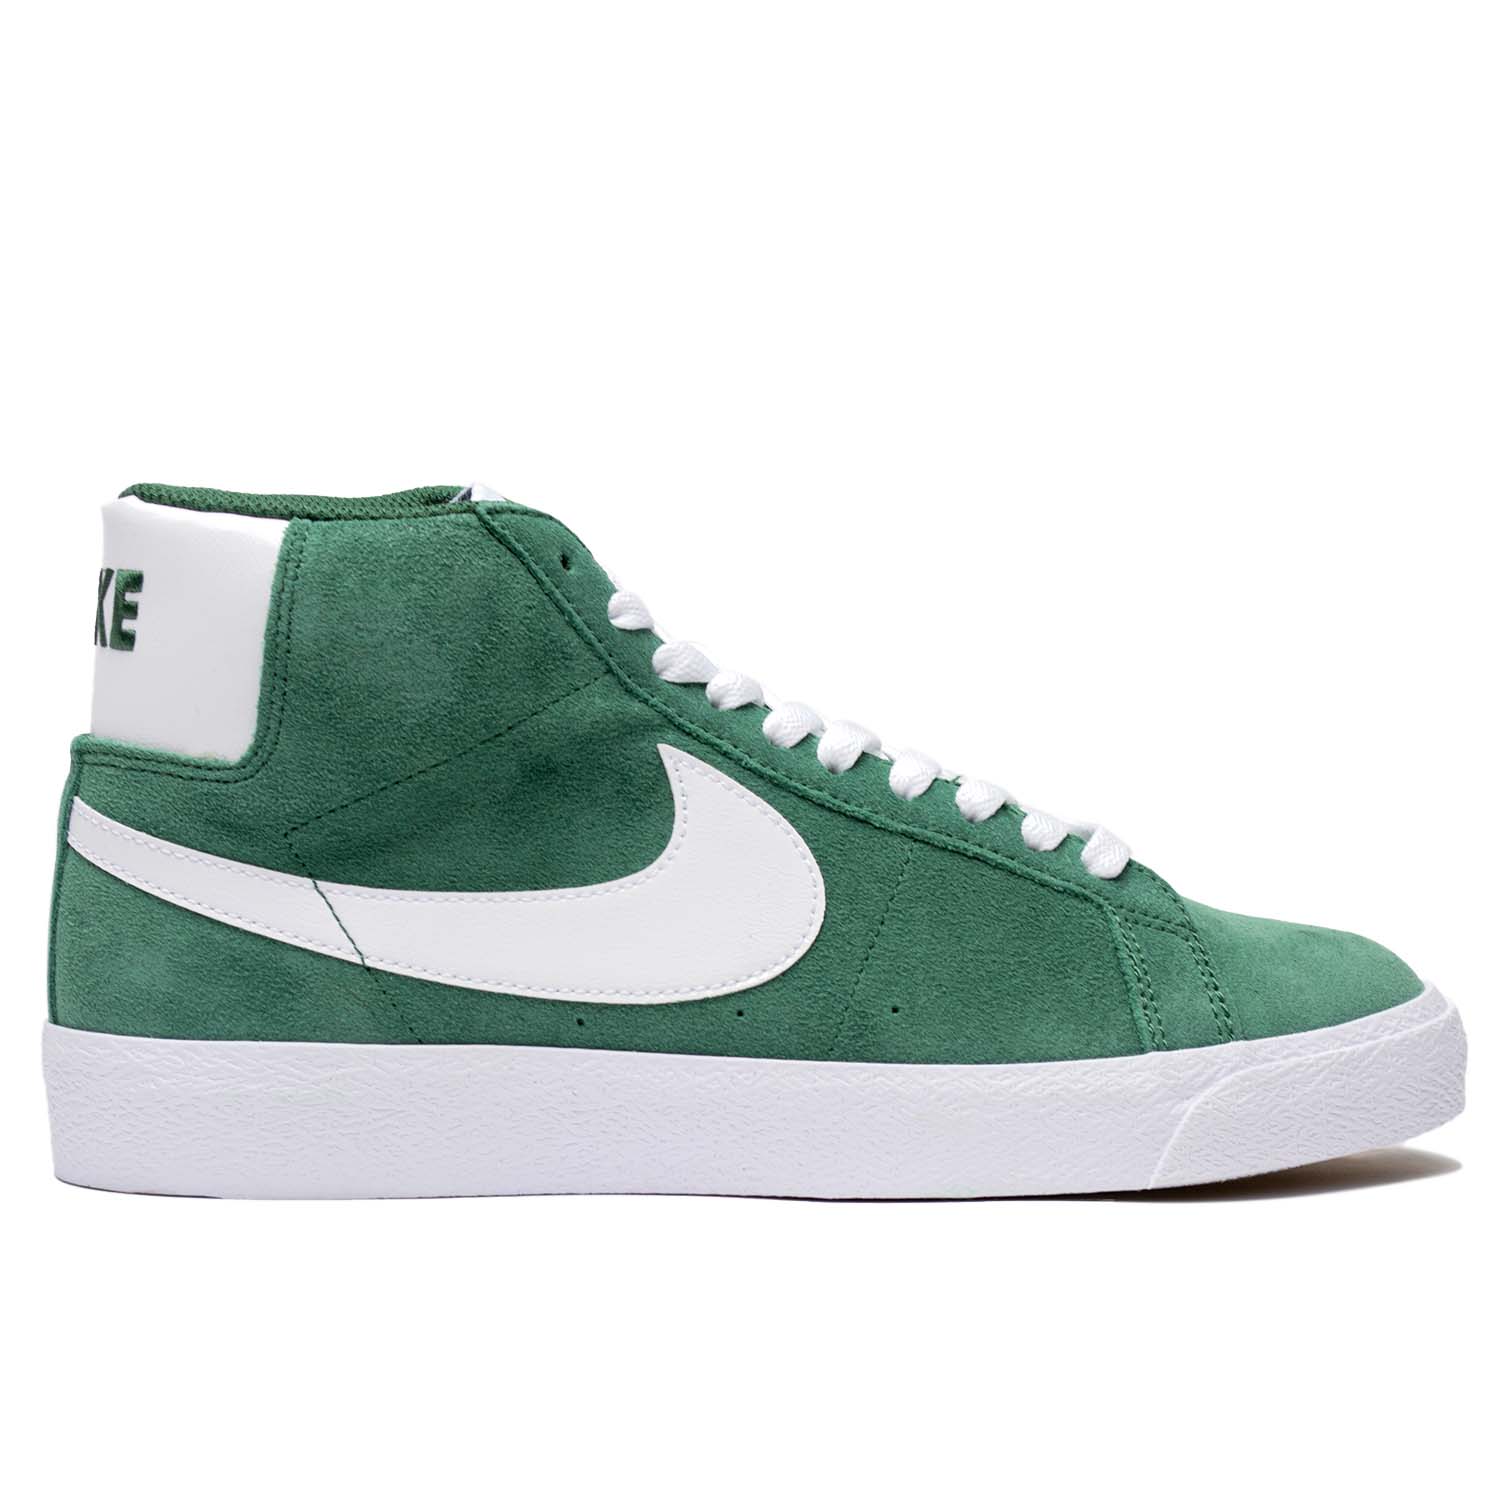 Nike Green suede high top skateboarding shoe with white Nike swoosh, white laces, and white sole. 